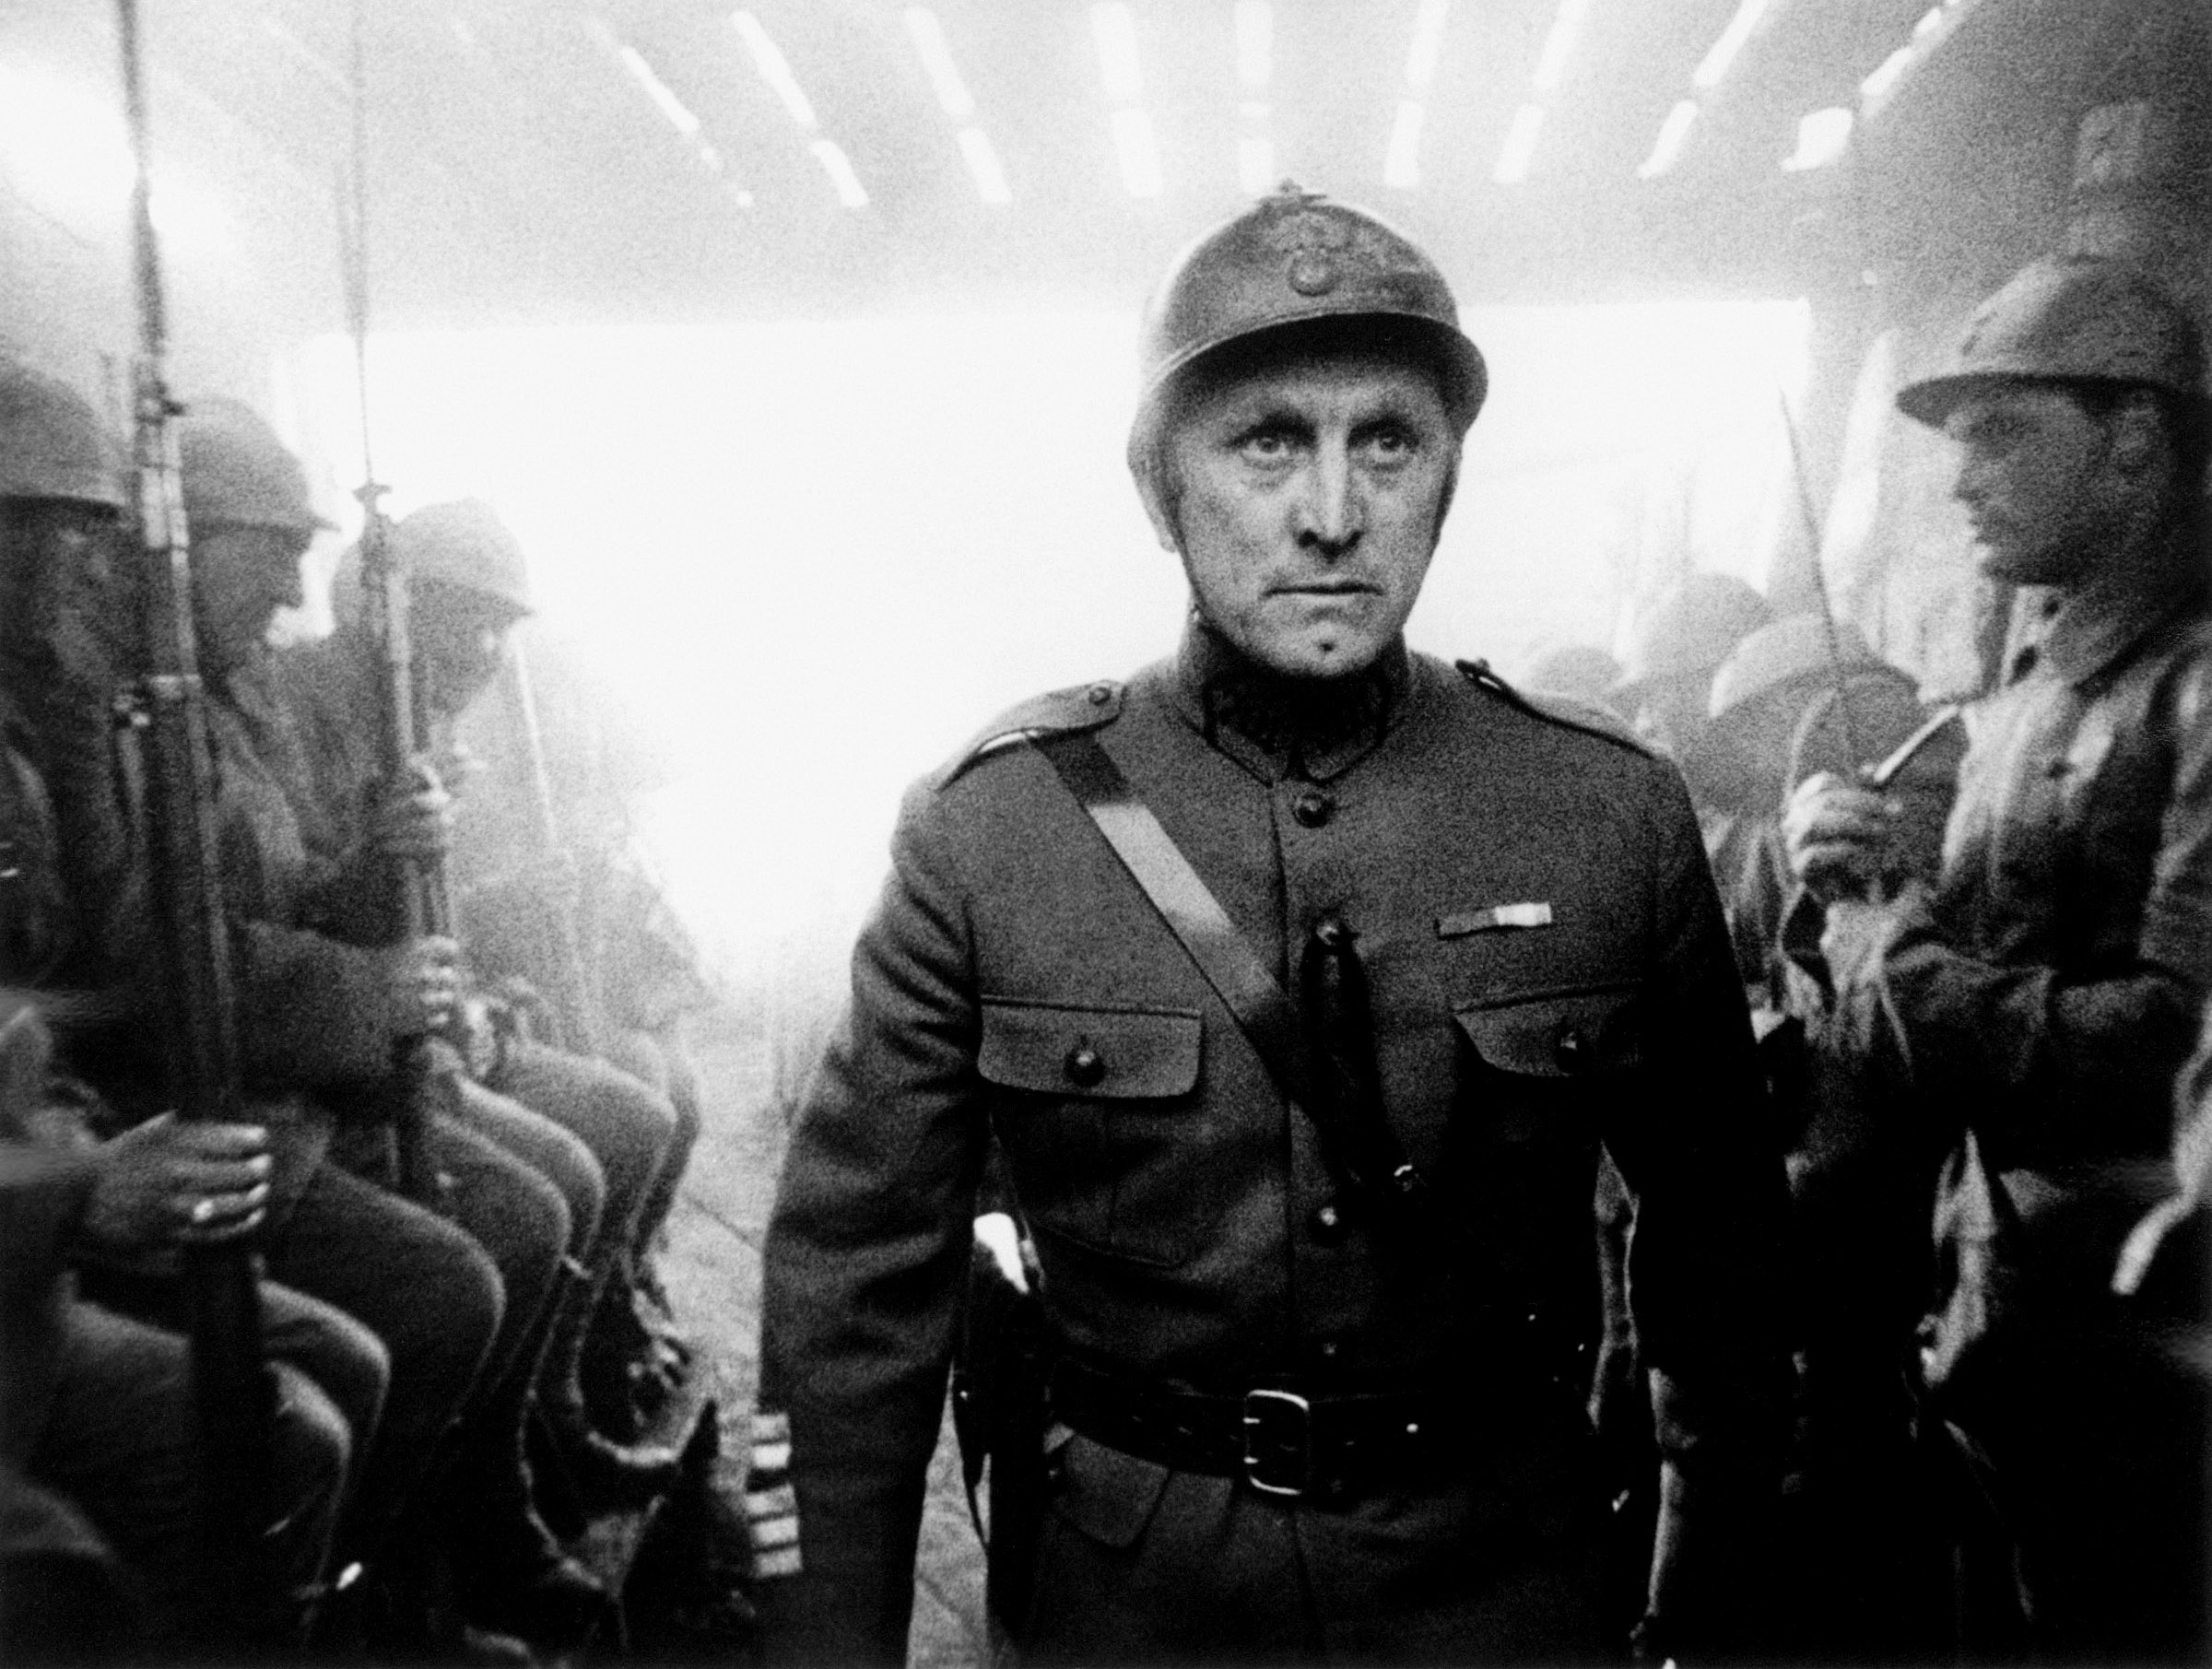 Kirk Douglas in Paths of Glory, 1957. (Everett Collection)